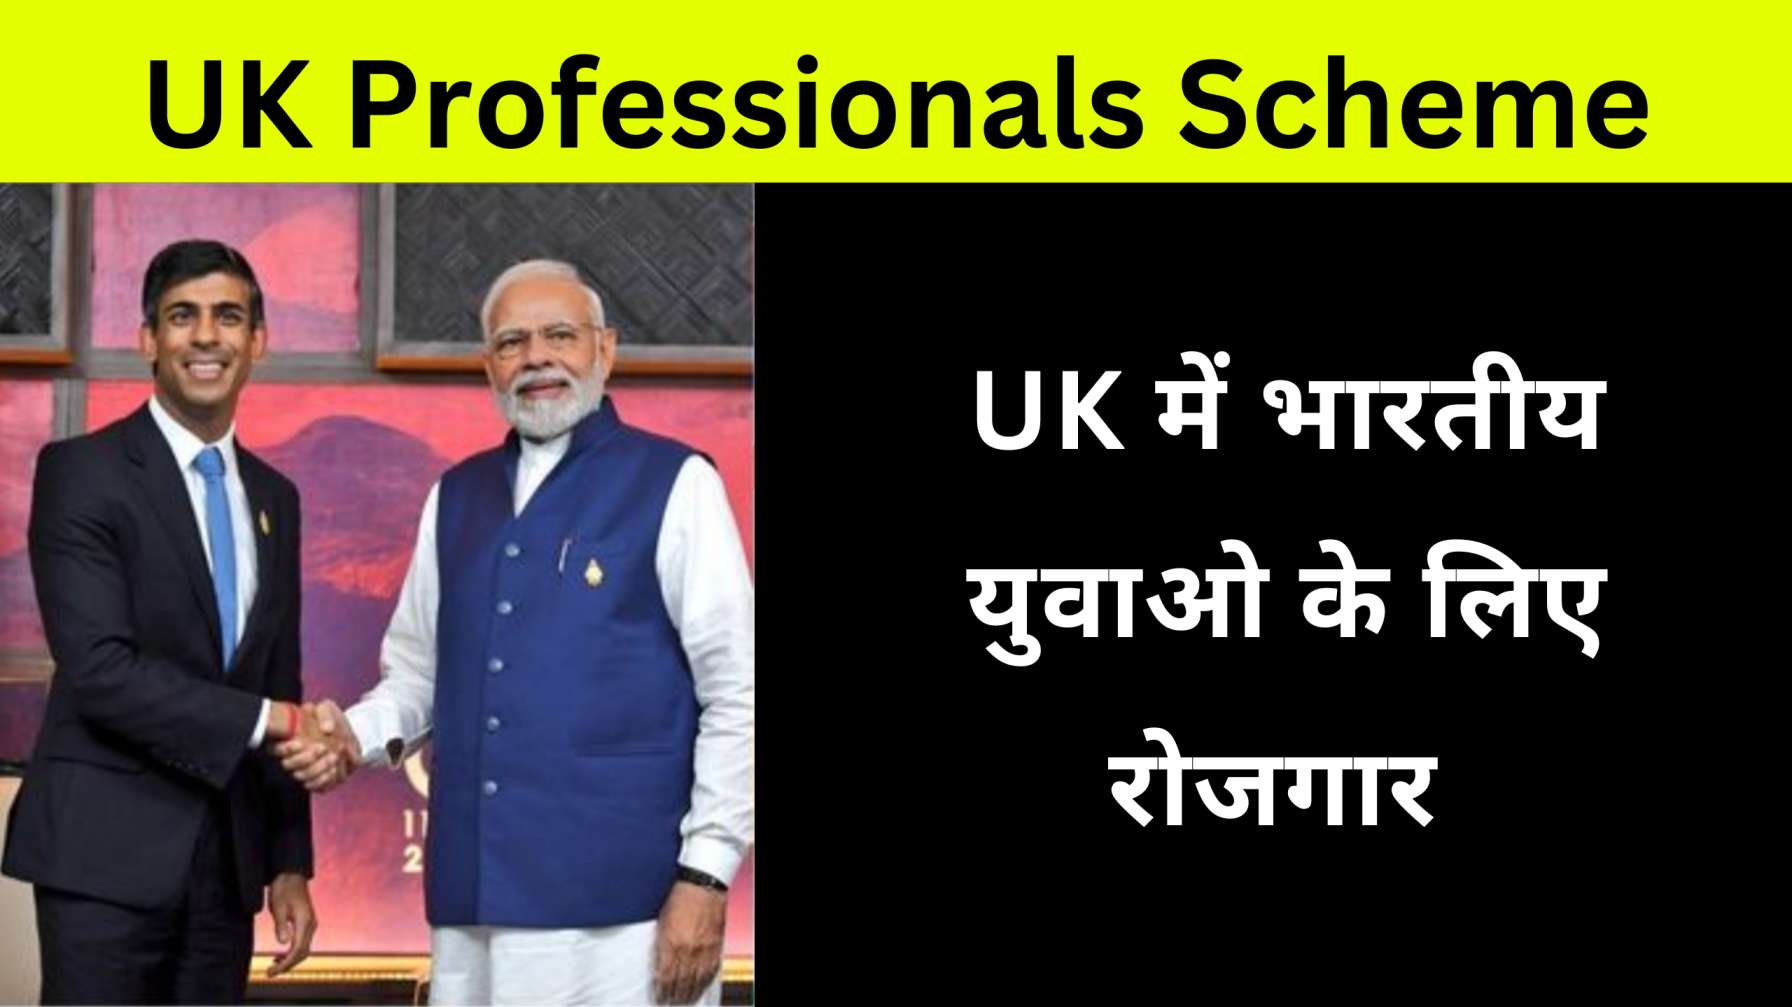 UK India Young Professionals Scheme 2023 (यूके इंडिया यंग प्रोफेशनल्स स्कीम) Online Register, Eligibility, Benefits, How To Apply For Visa Under Young Professionals Scheme 2023 Last Date